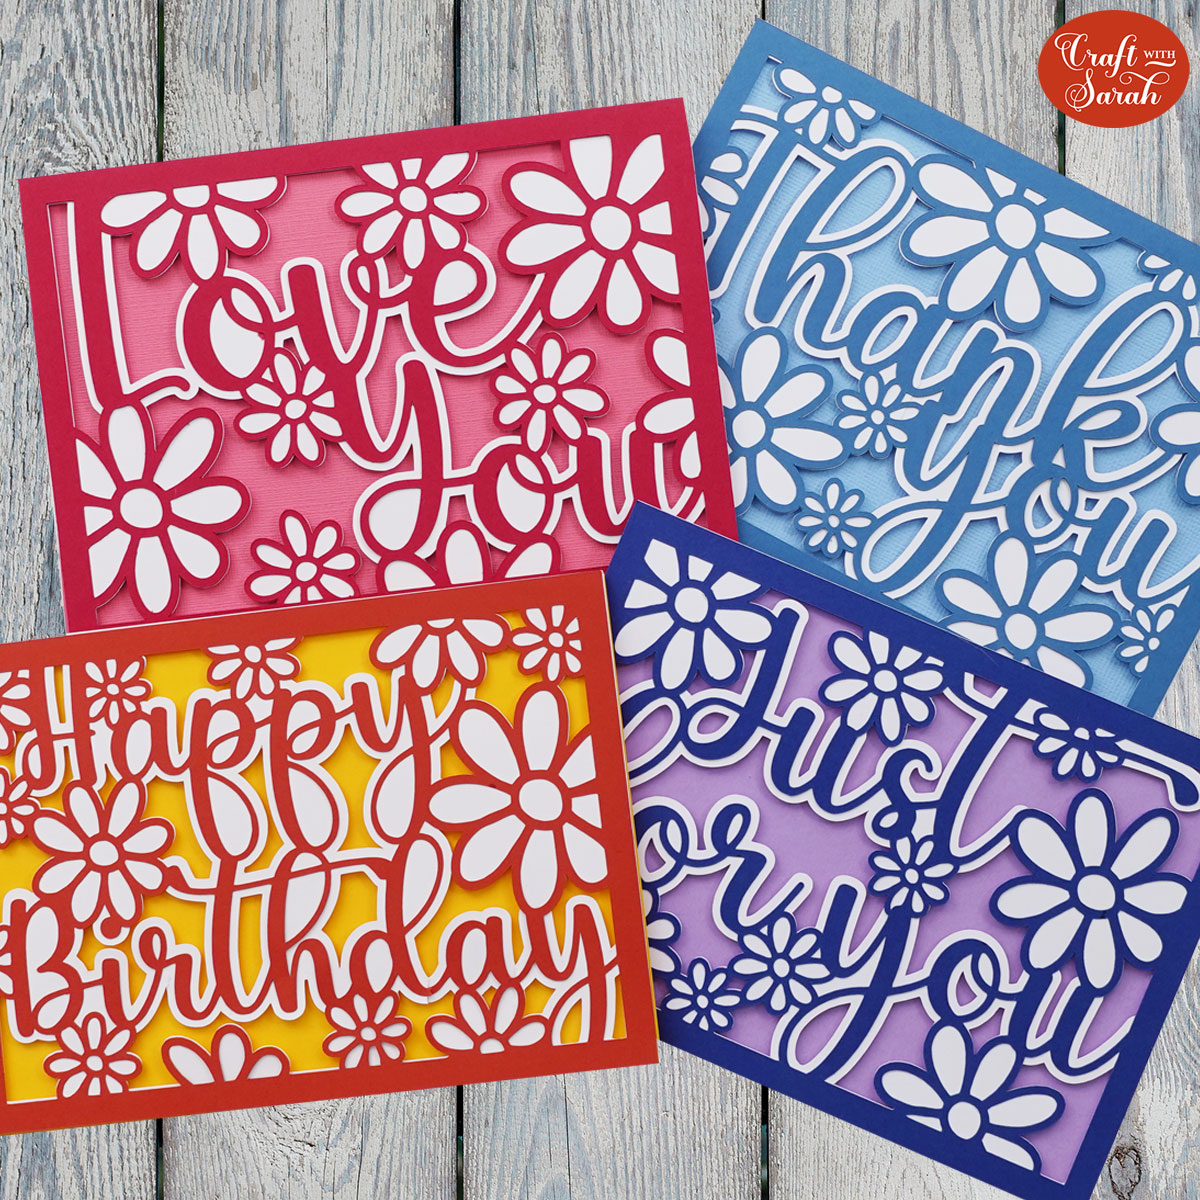 Word Dies For Card Making: How To Add These Easily To Greeting Cards 